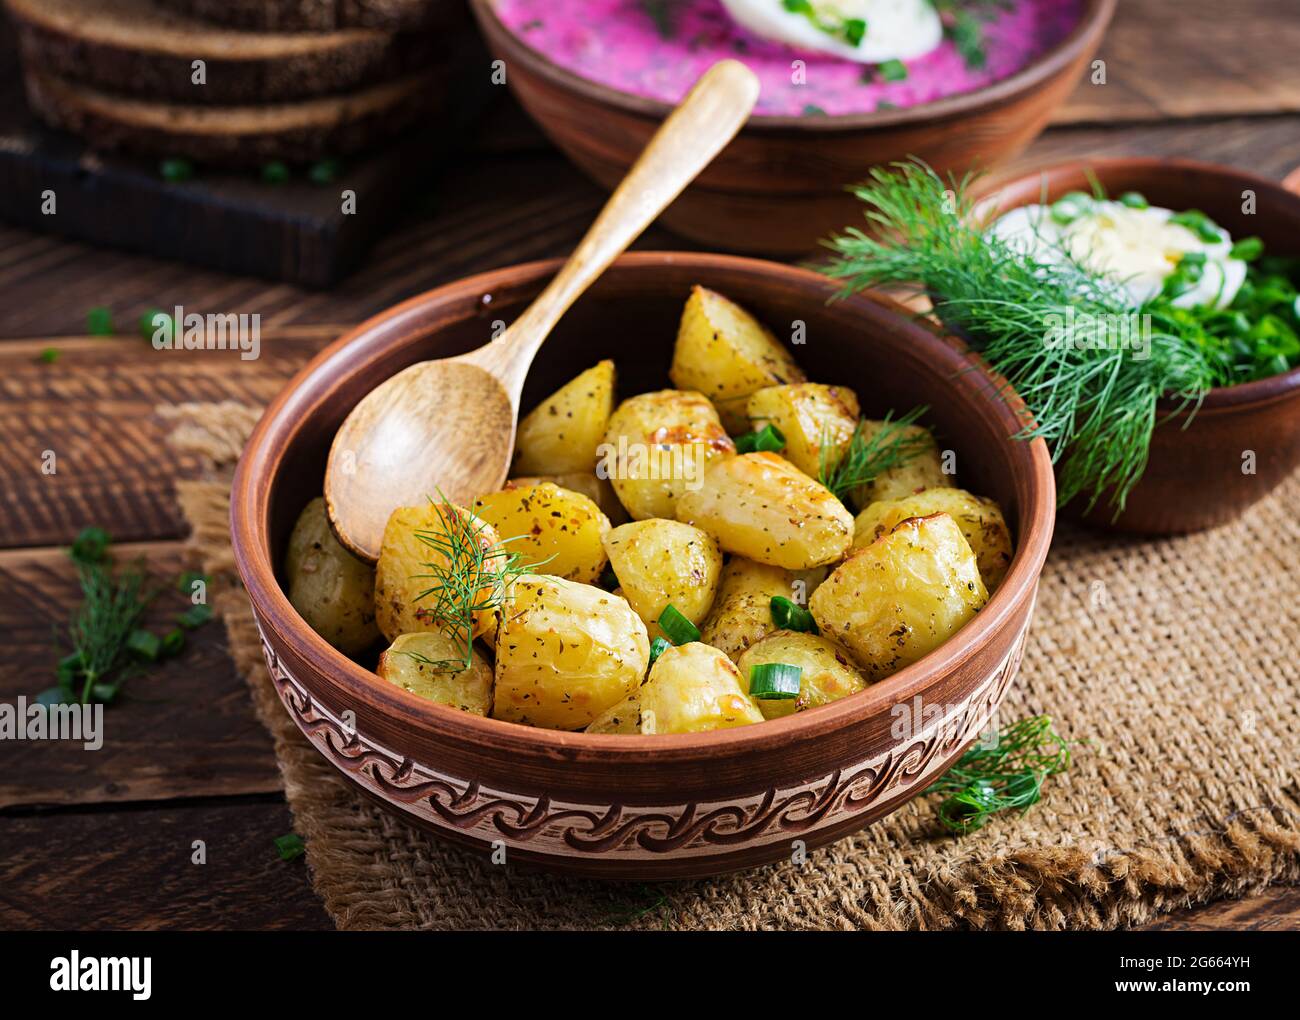 Baked potato wedges in a bowl on wooden table.  Delicious lunch. Stock Photo